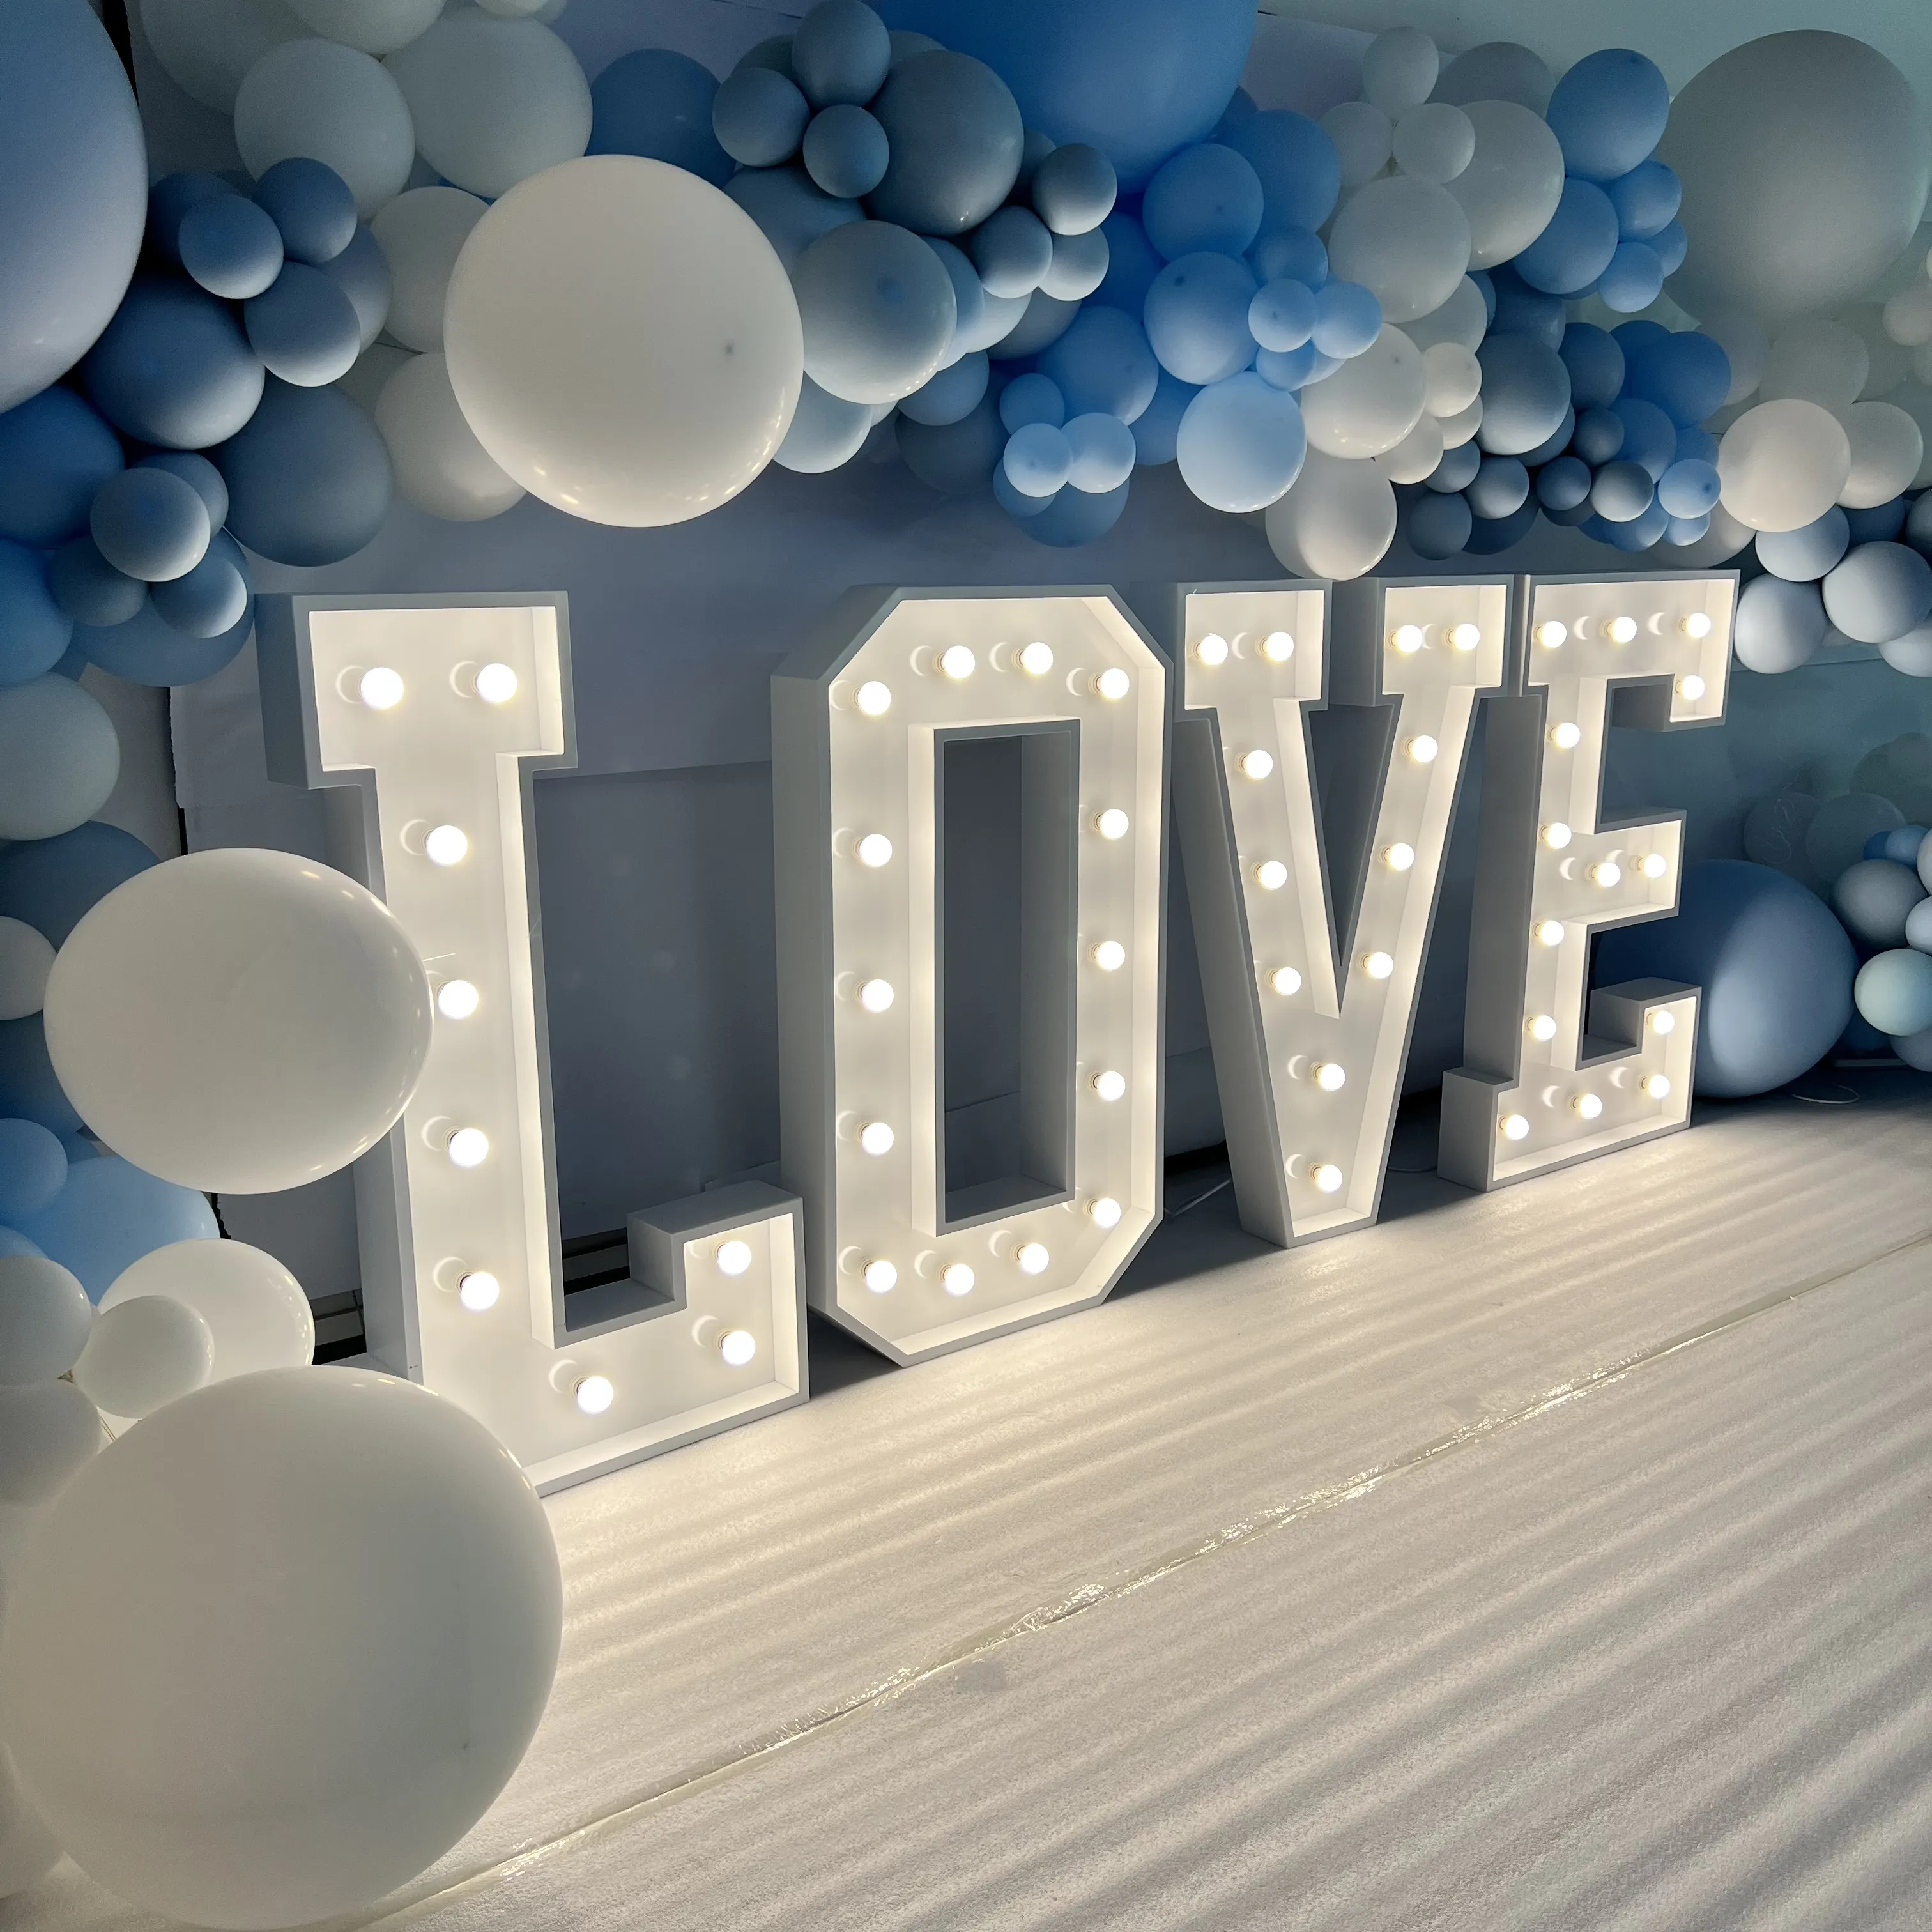 Wedding Baby 5 Ft Rental Stainless Steel 4ft Marquee Letters Love Big Size Sign Light